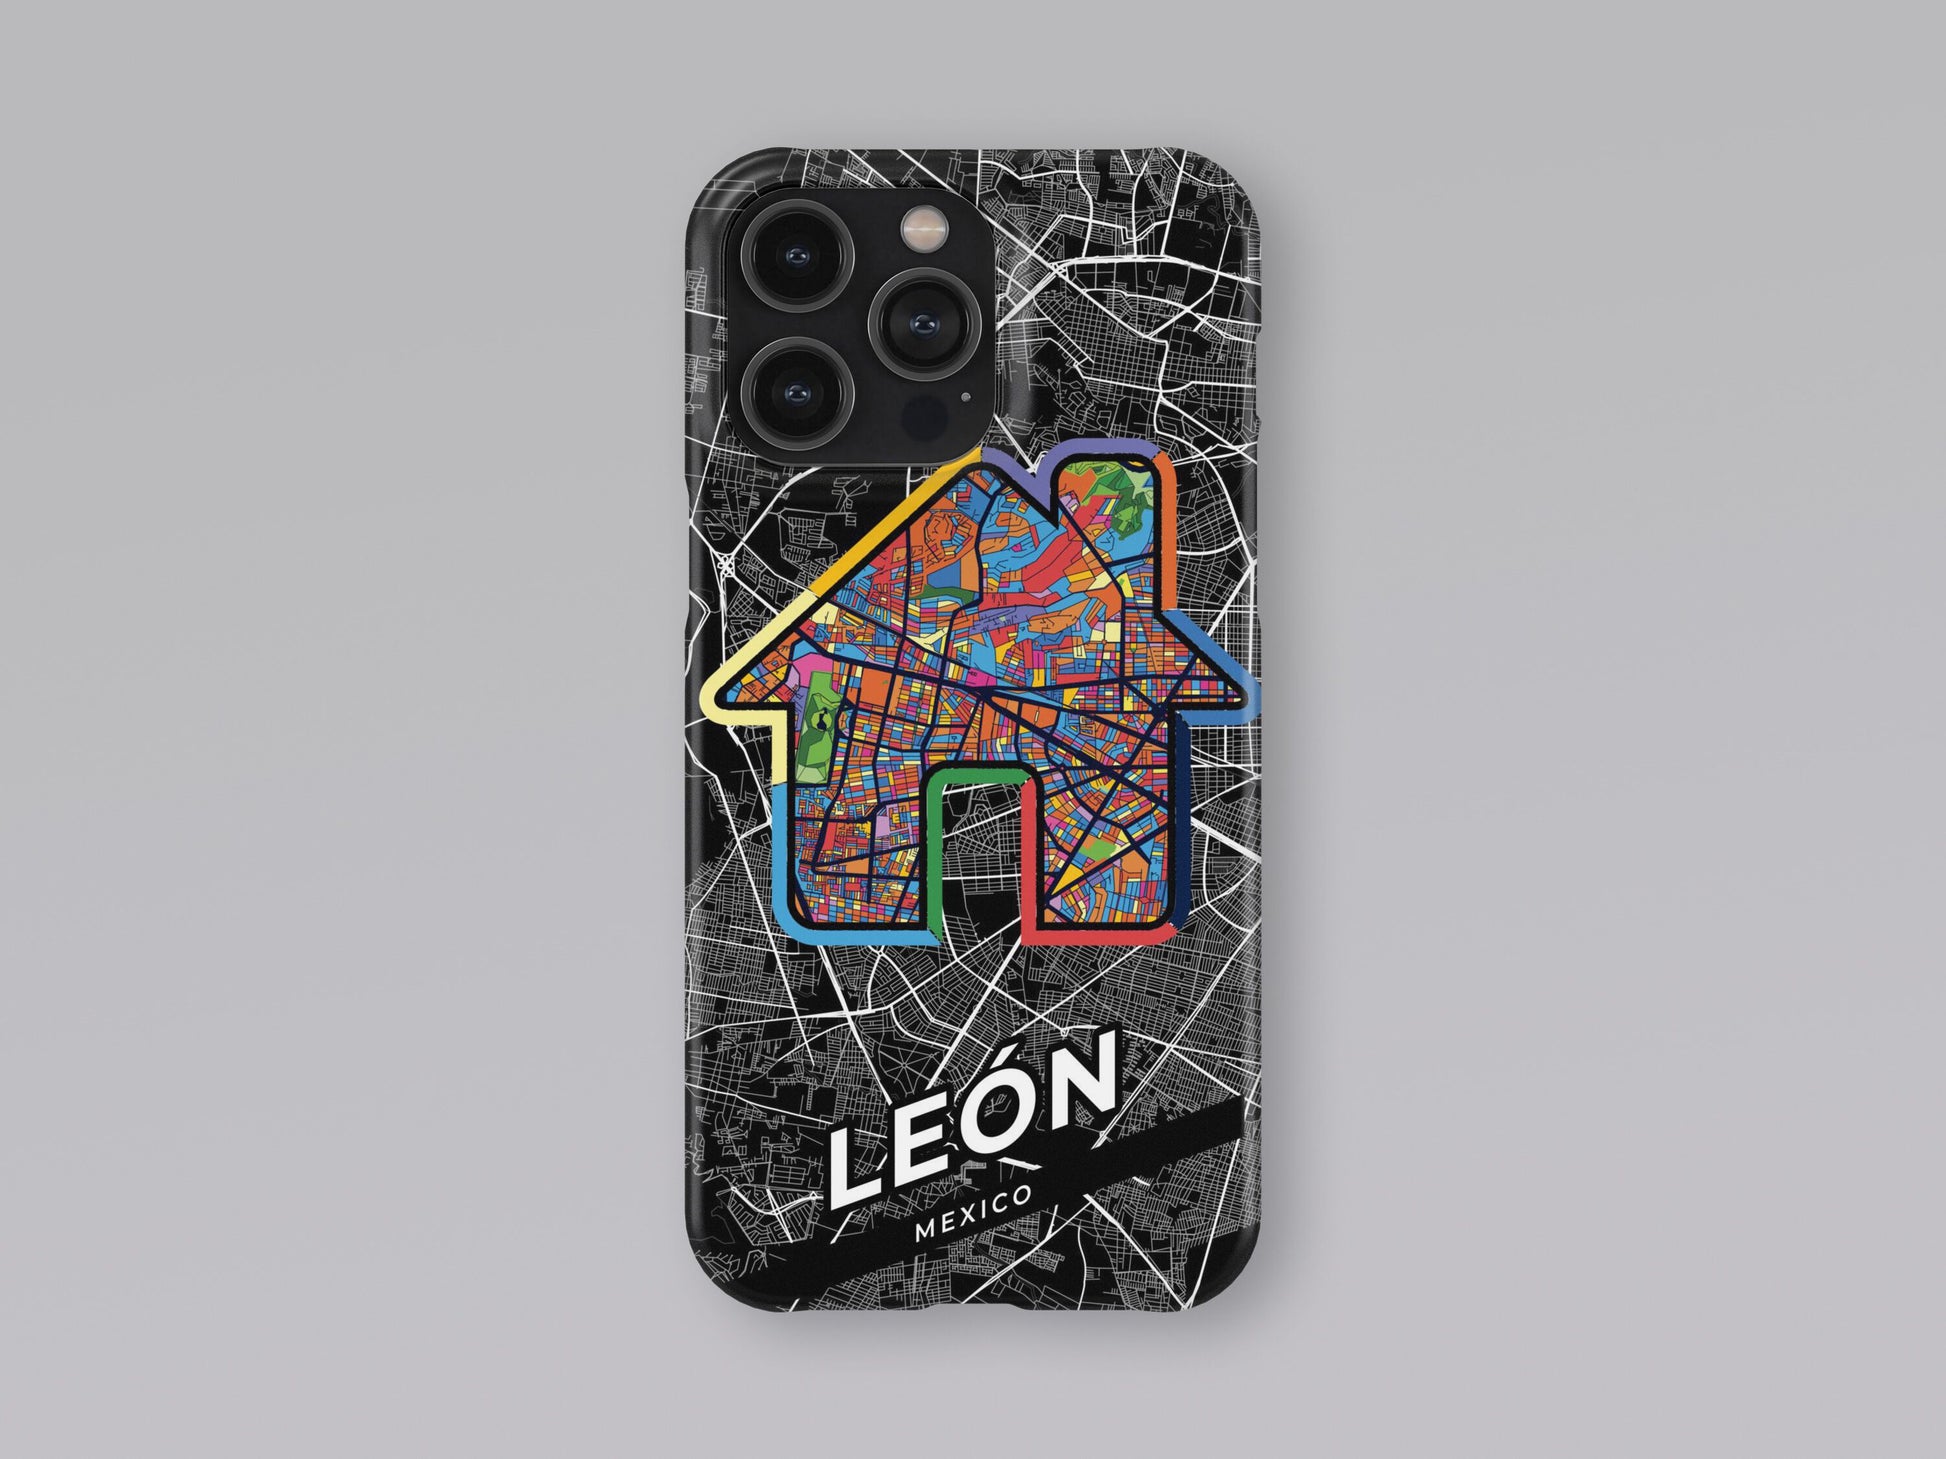 León Mexico slim phone case with colorful icon. Birthday, wedding or housewarming gift. Couple match cases. 3